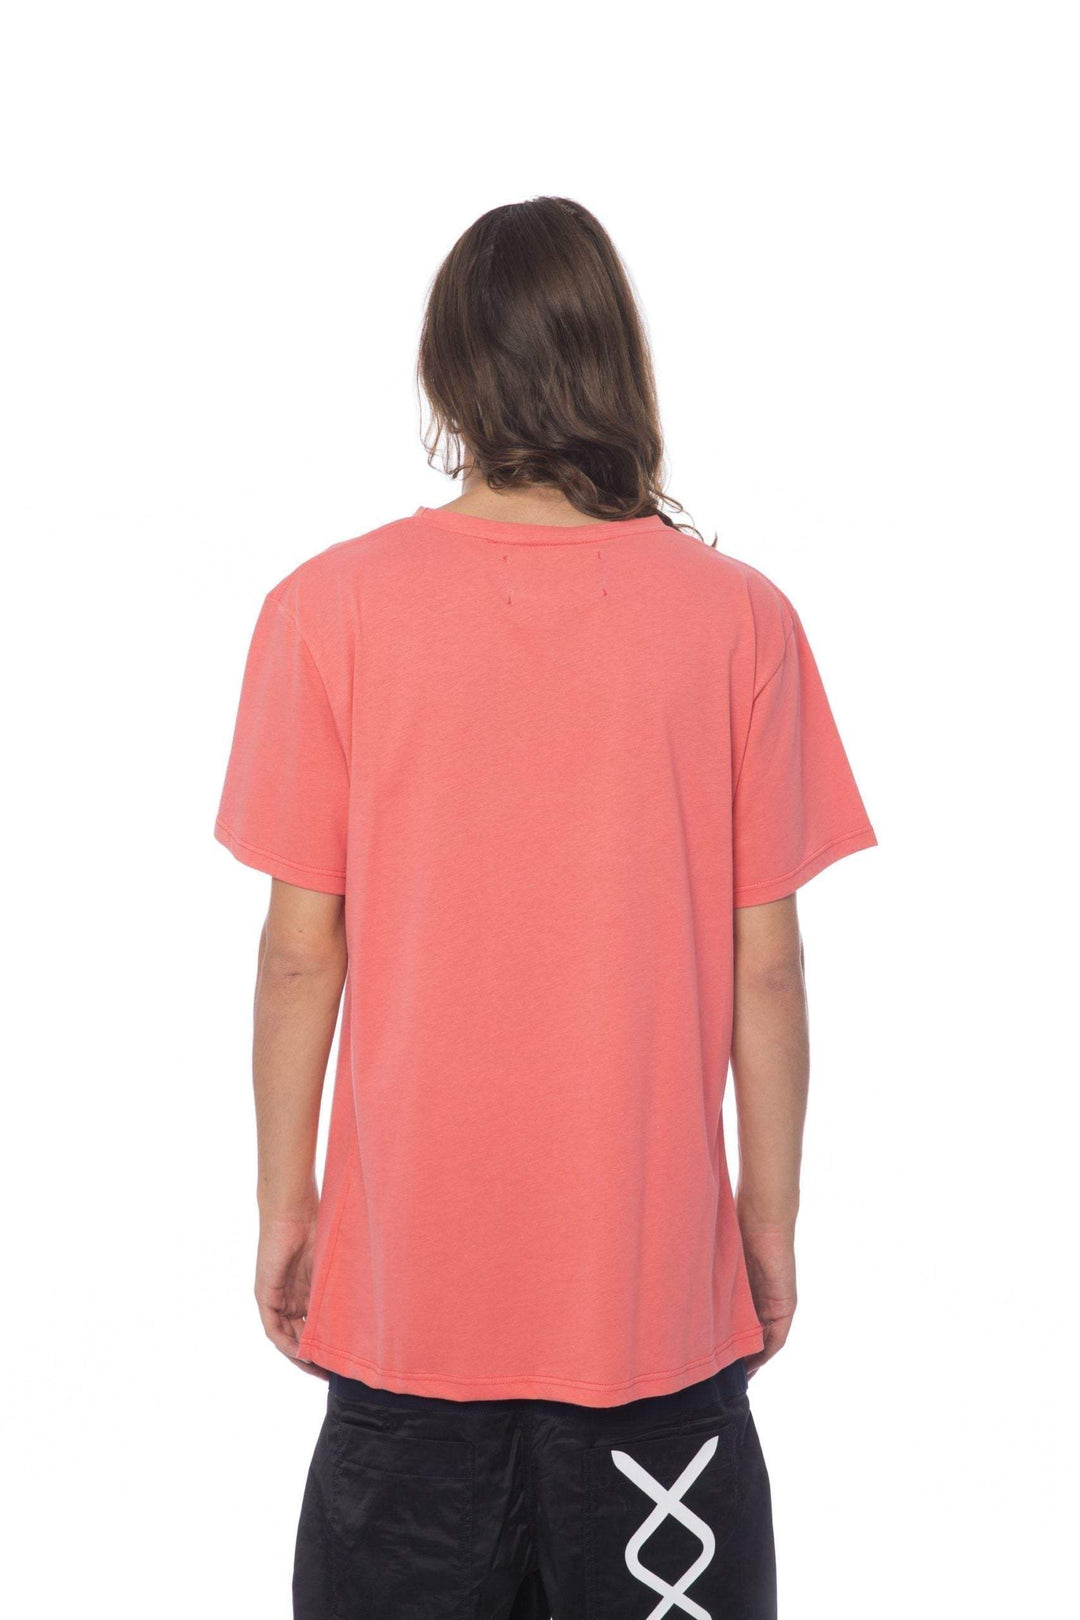 Nicolo Tonetto round neck printed T-shirt #men, feed-color-Pink, feed-gender-adult, feed-gender-male, L, M, Nicolo Tonetto, Pink, T-shirts - Men - Clothing at SEYMAYKA